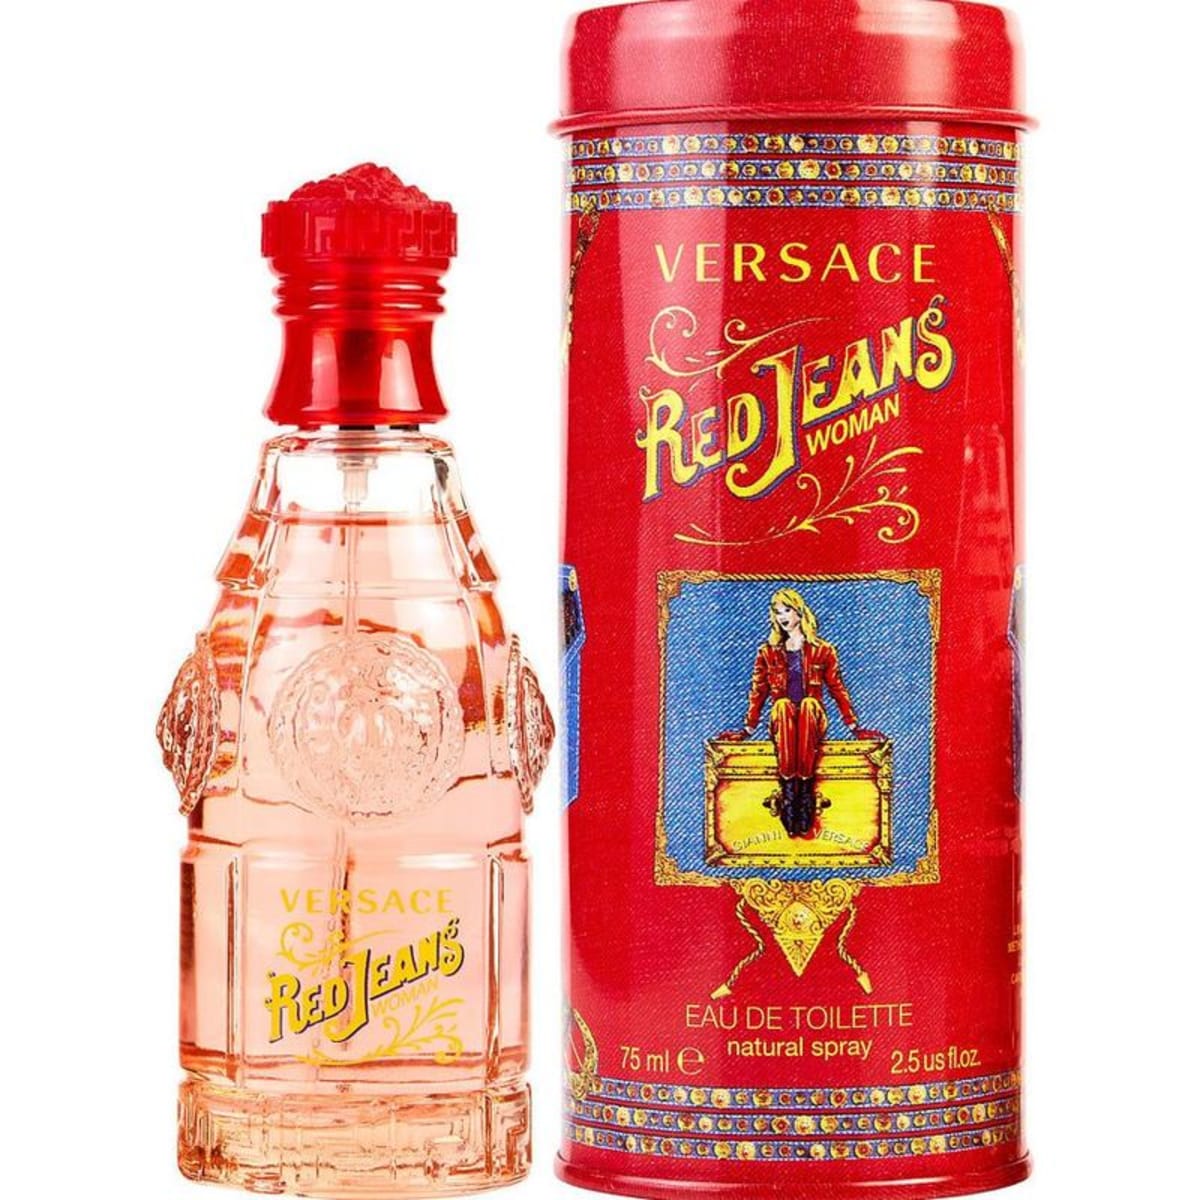 VERSACE RED JEANS WOMAN EDT 75 ml - samawa perfumes 